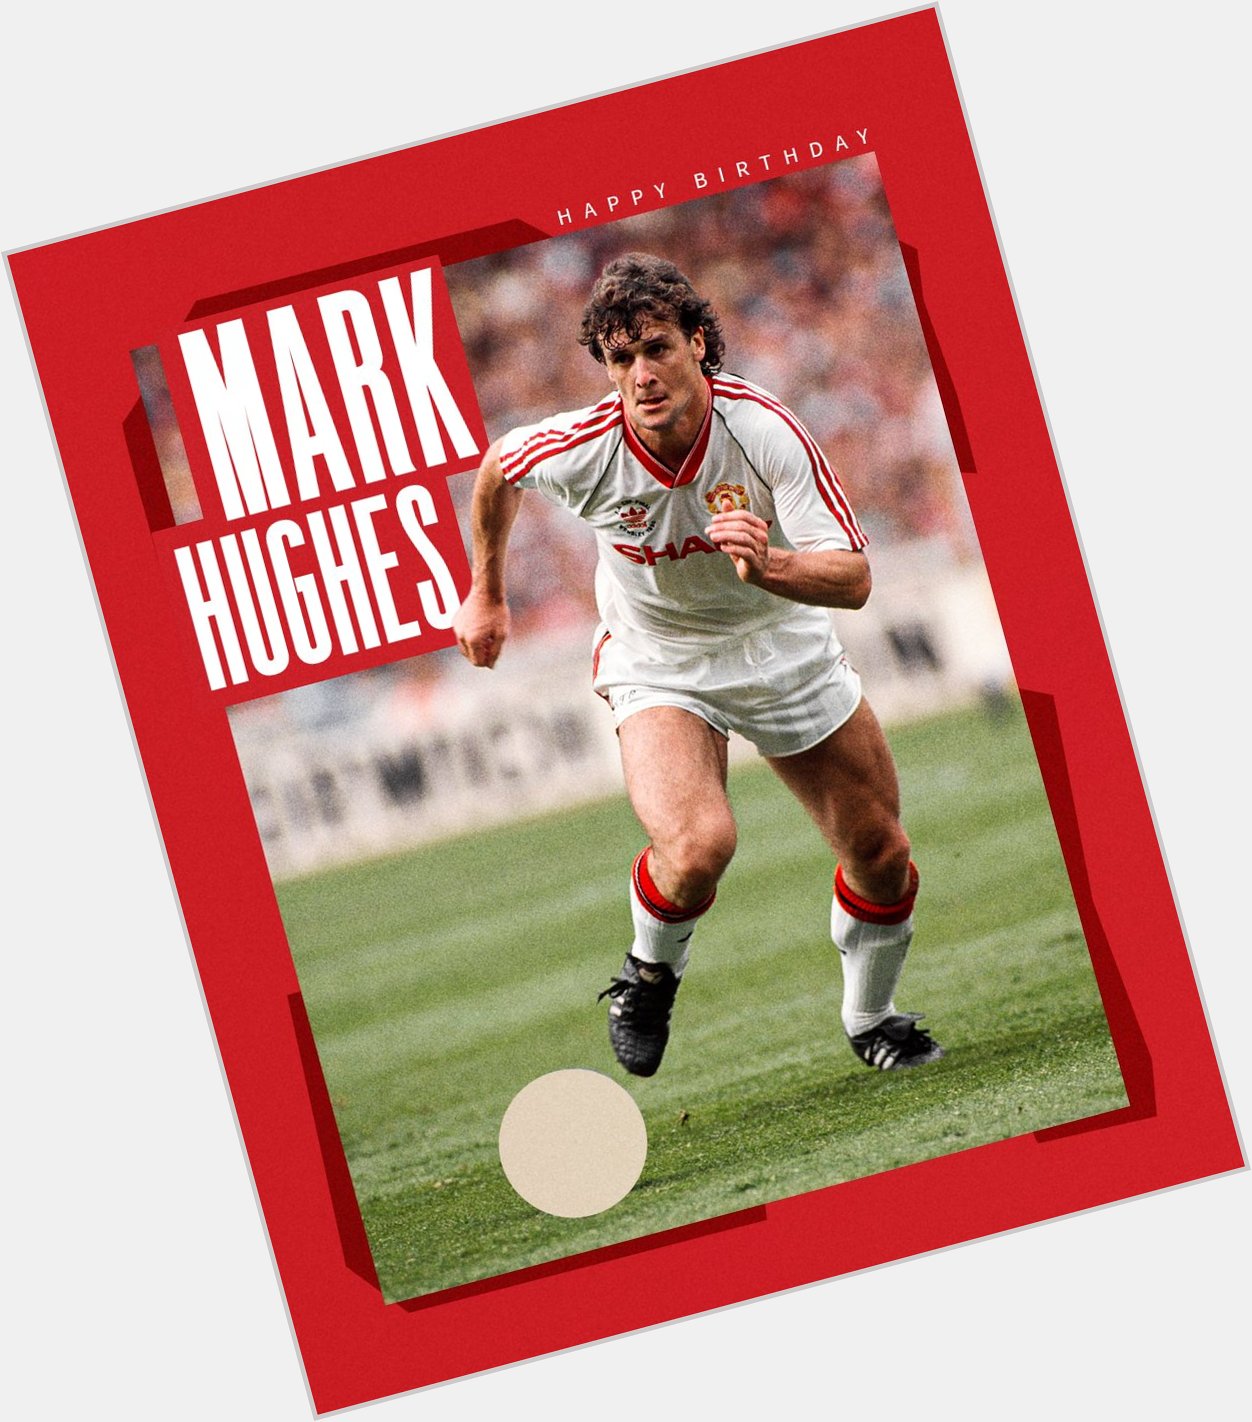 4  6  7  appearances  1  6  3  goals Join us in wishing United legend Mark Hughes a happy birthday!  